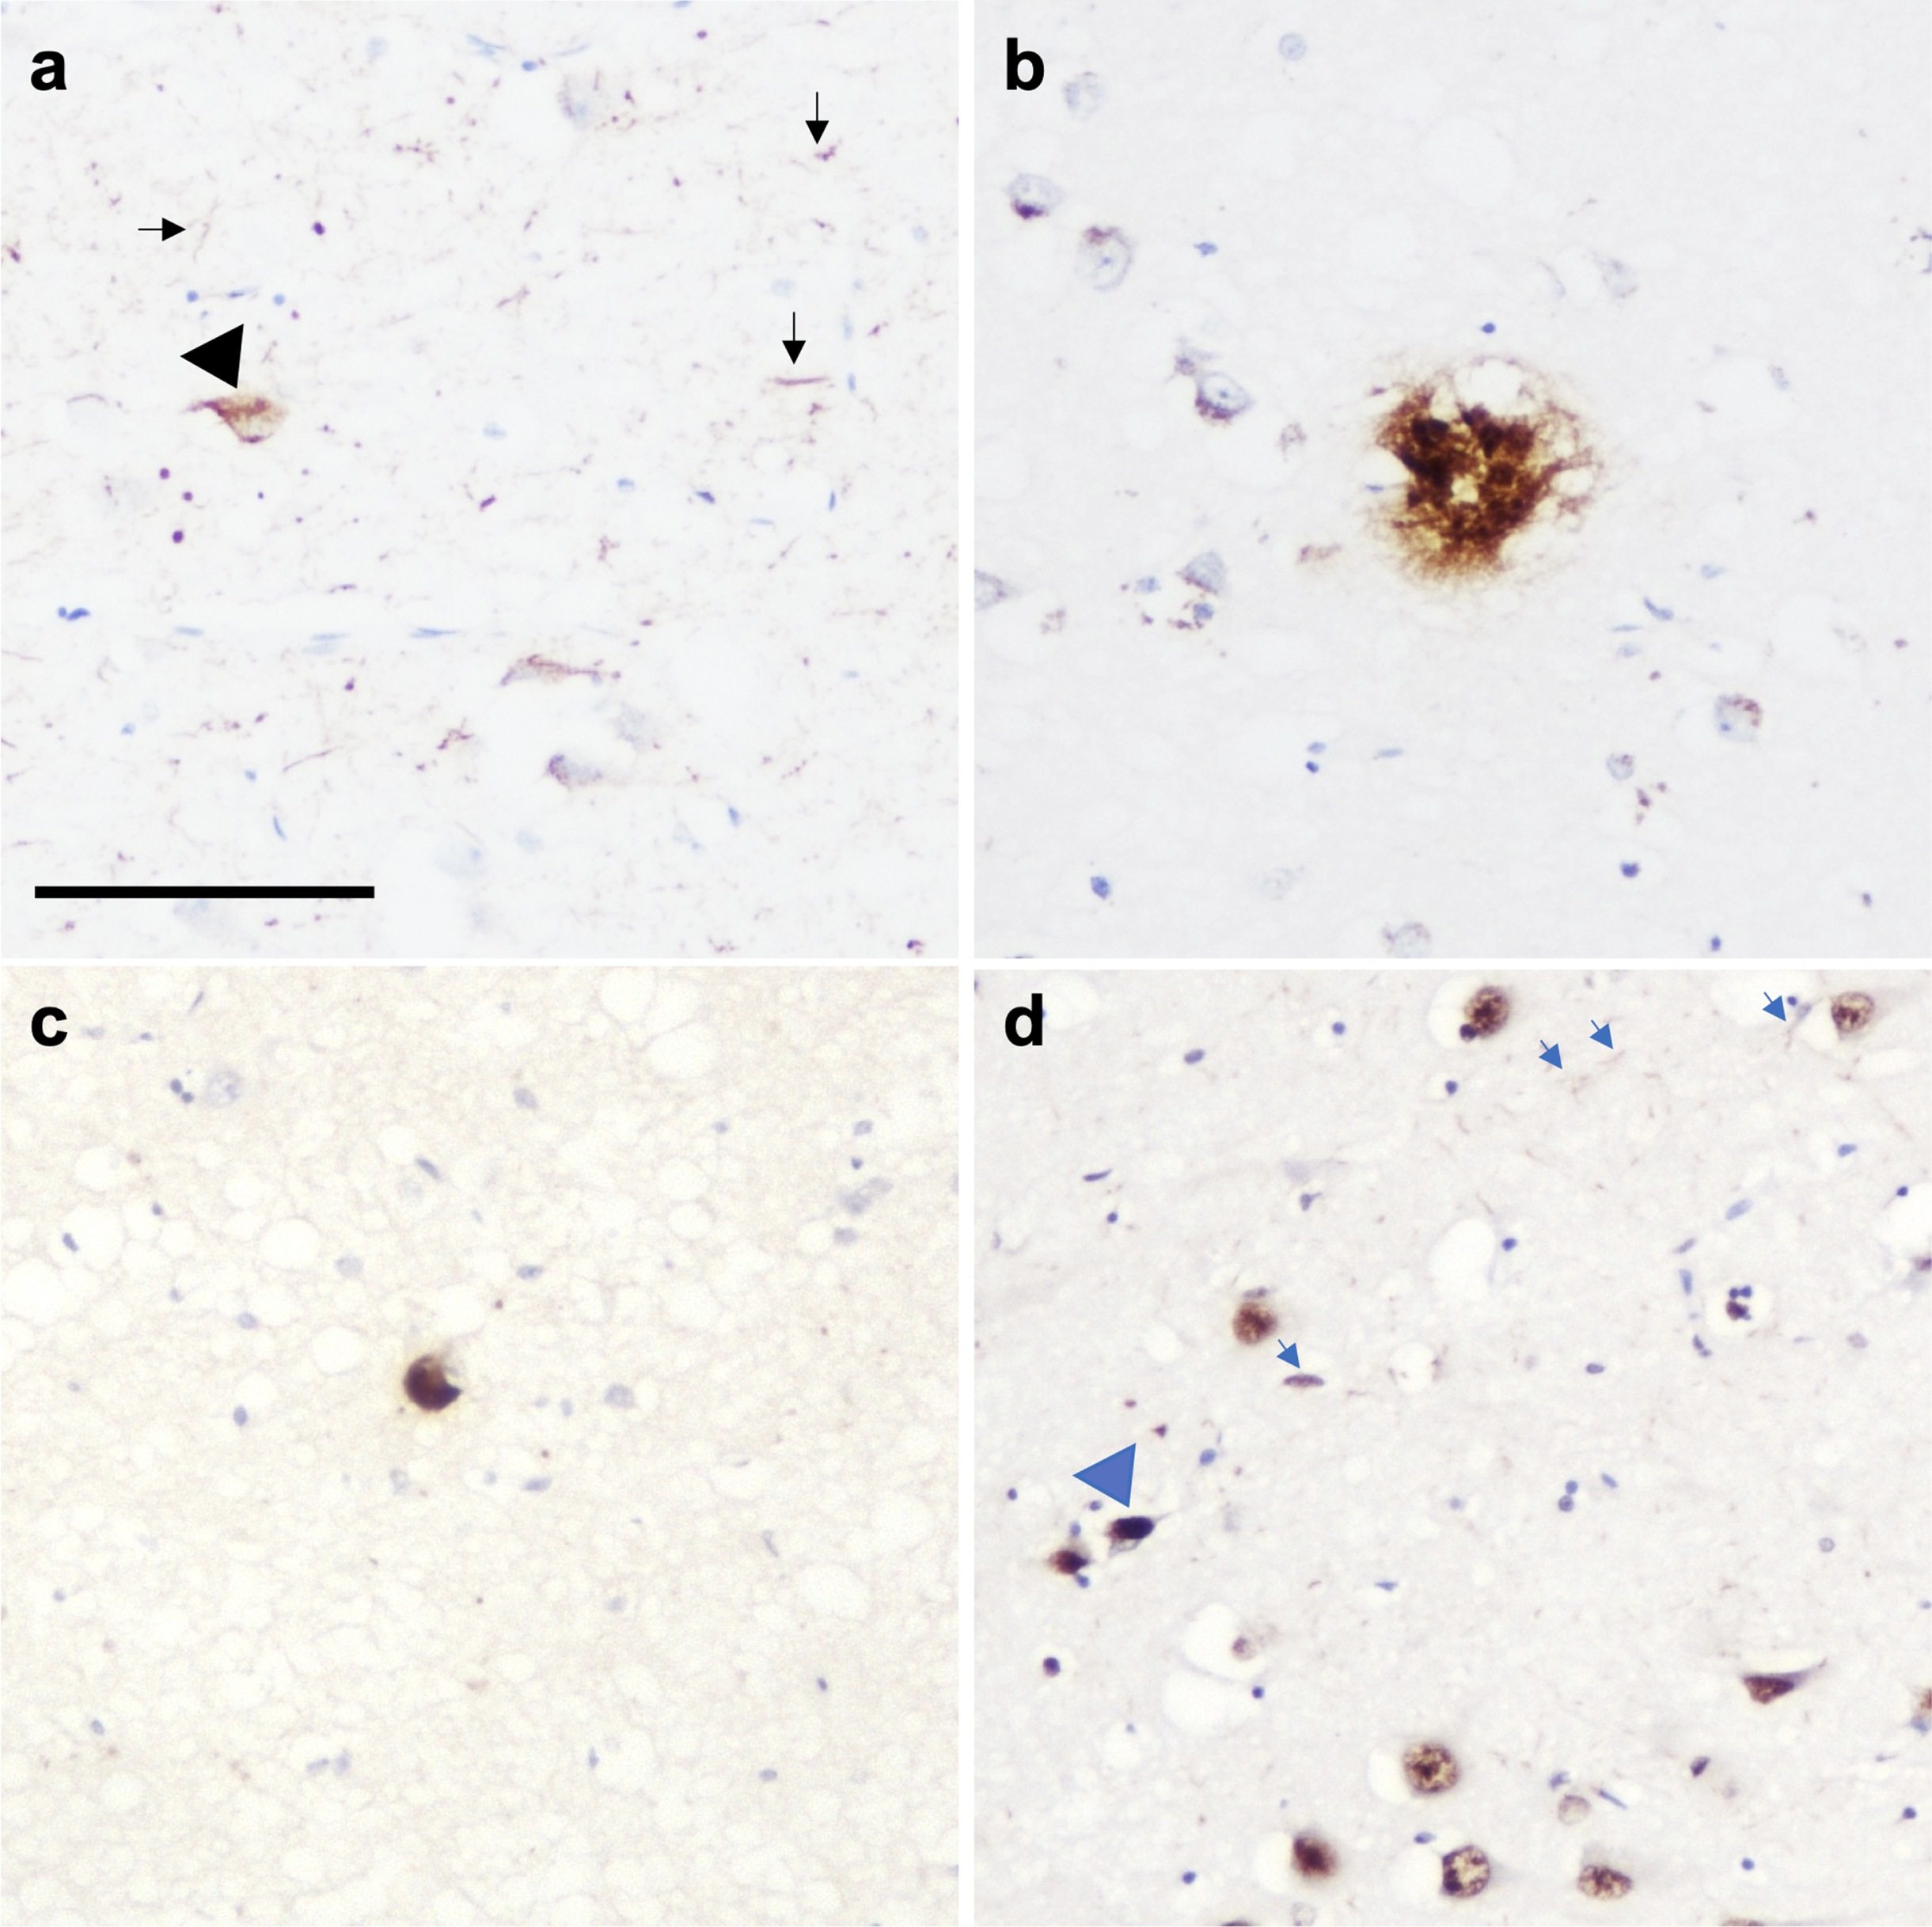 Photomicrograph demonstrating the presence of multiple pathologies in CA1 region of the hippocampus in a PD case. (a) Neurofibrillary tangles (black arrowhead) and neuropil threads (black arrows), (b) amyloid-β plaque, (c) Lewy body, and (d) TDP-43 neuronal intranuclear inclusion (blue arrowhead) and dystrophic neurites (blue arrows). Scale bar represents 100μm.